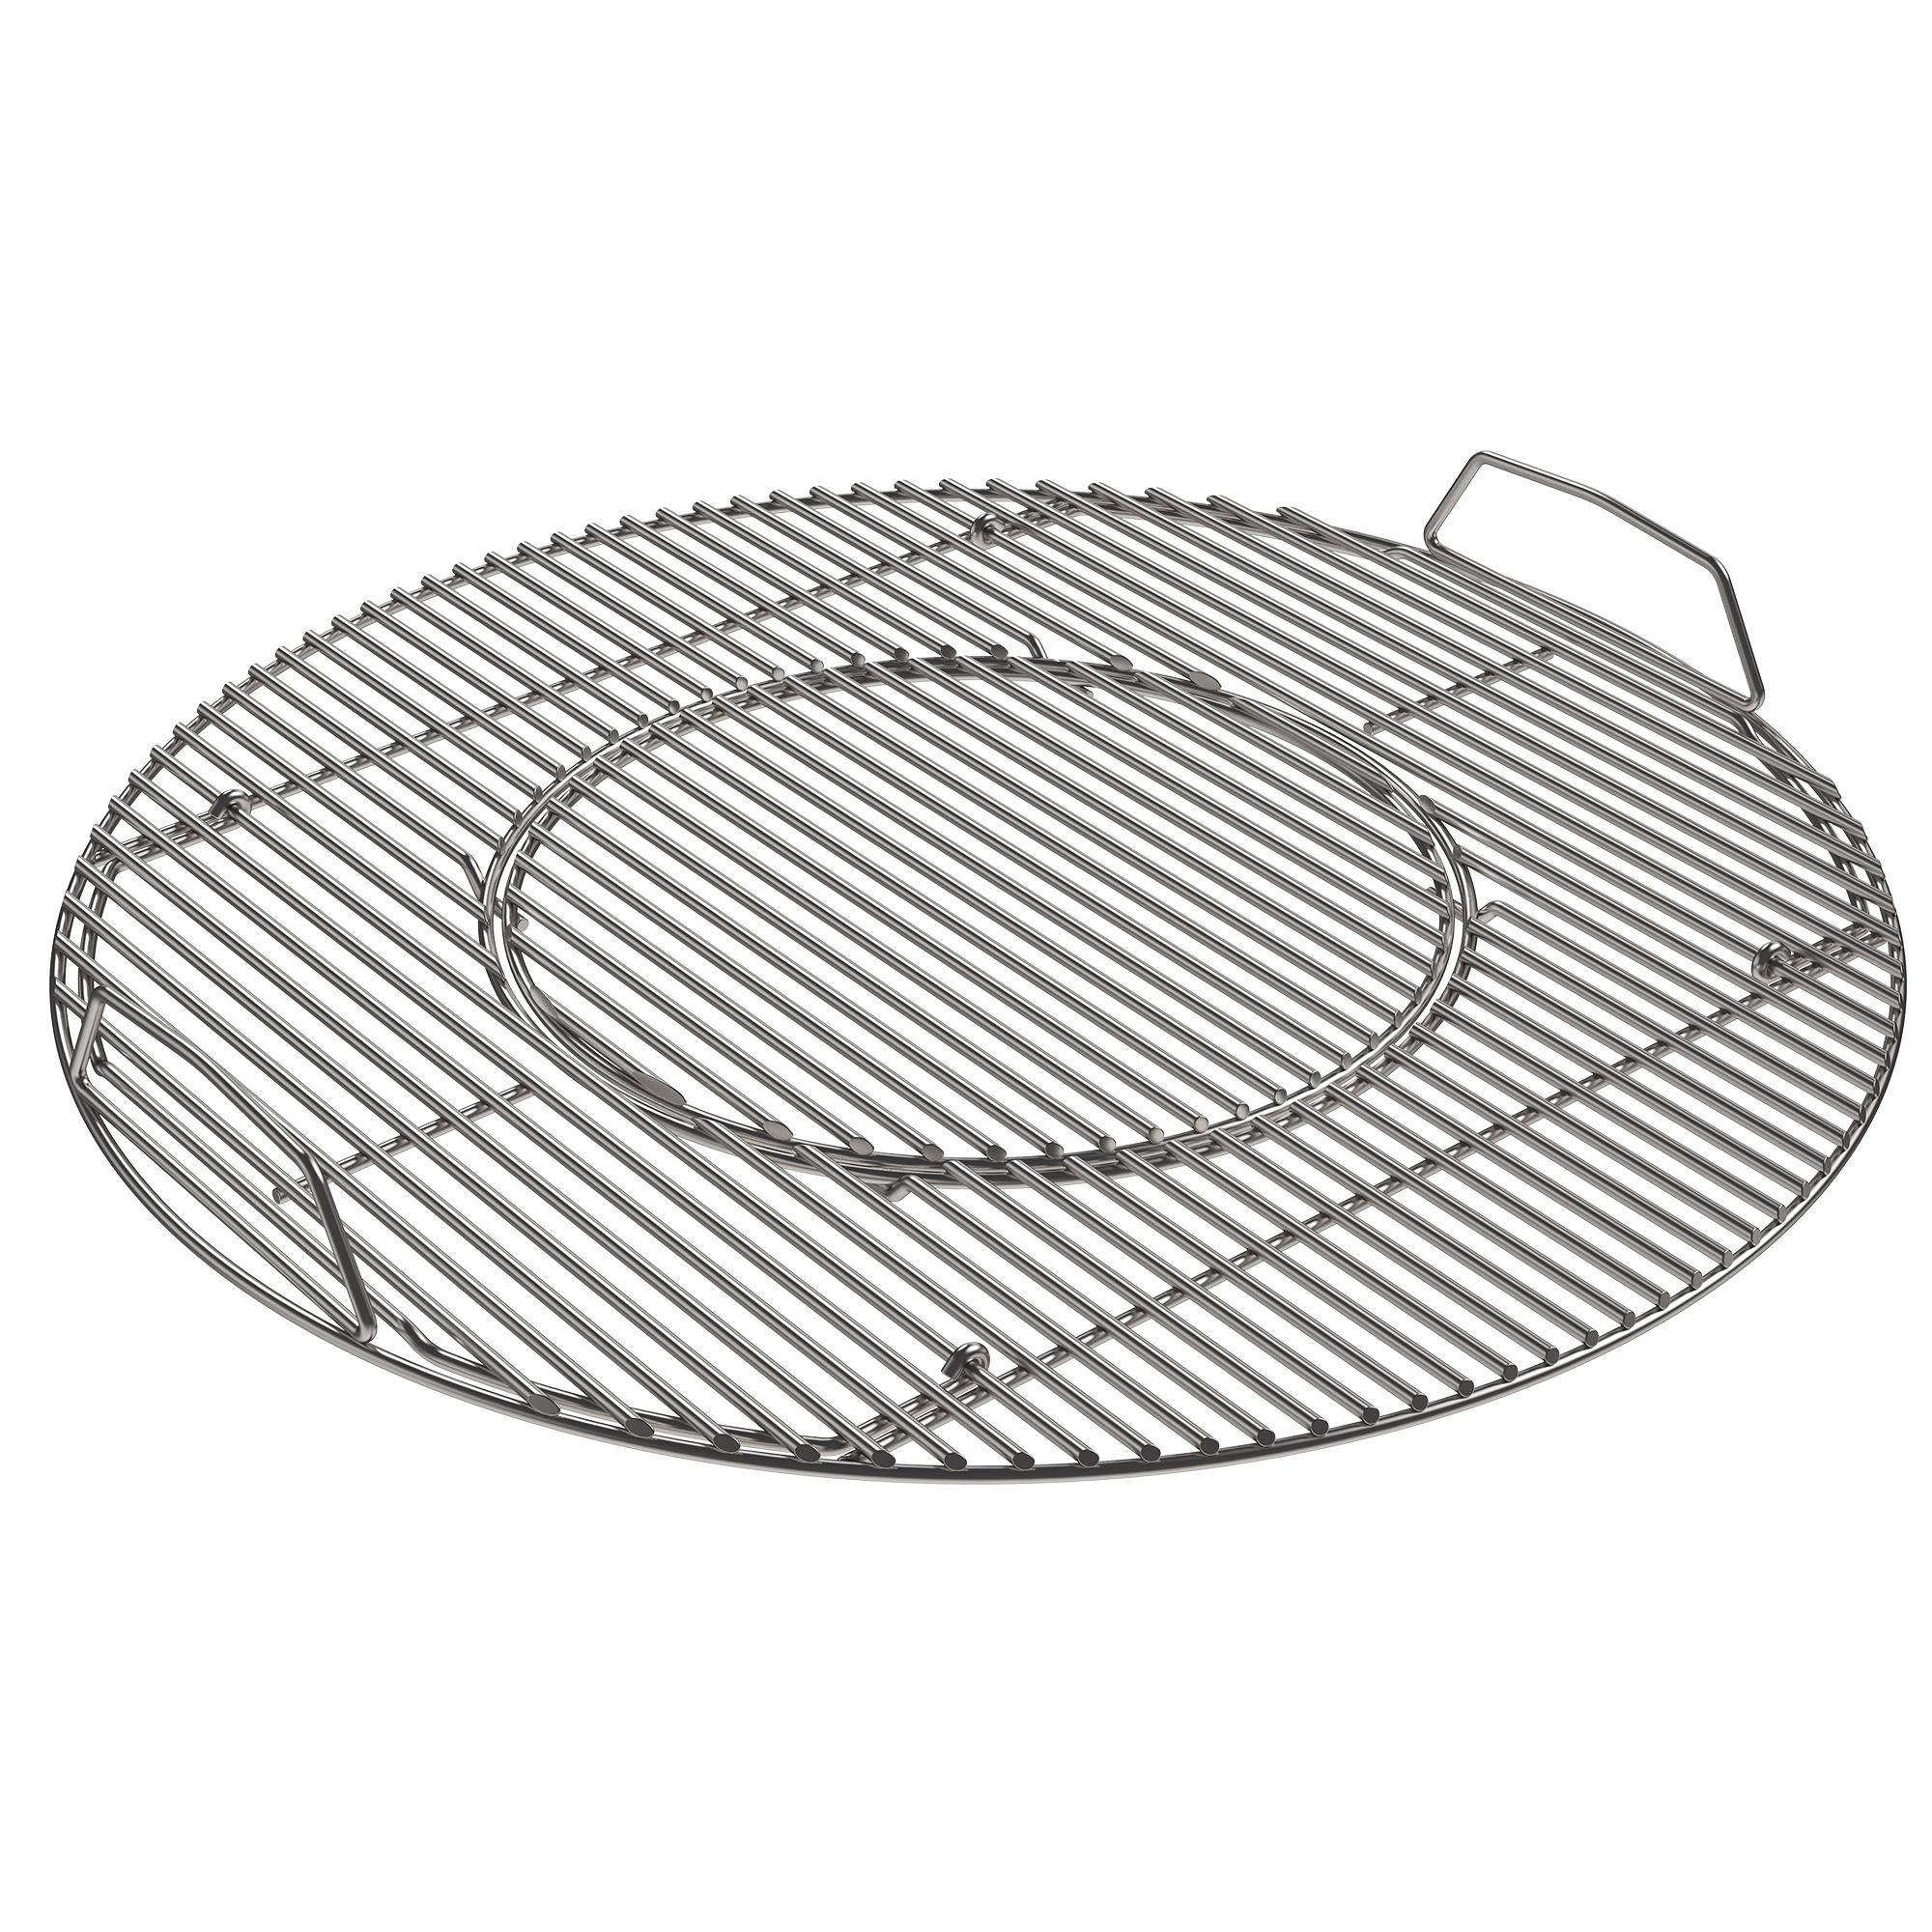 Stainless steel grill grate Vario+ for No.1 F50